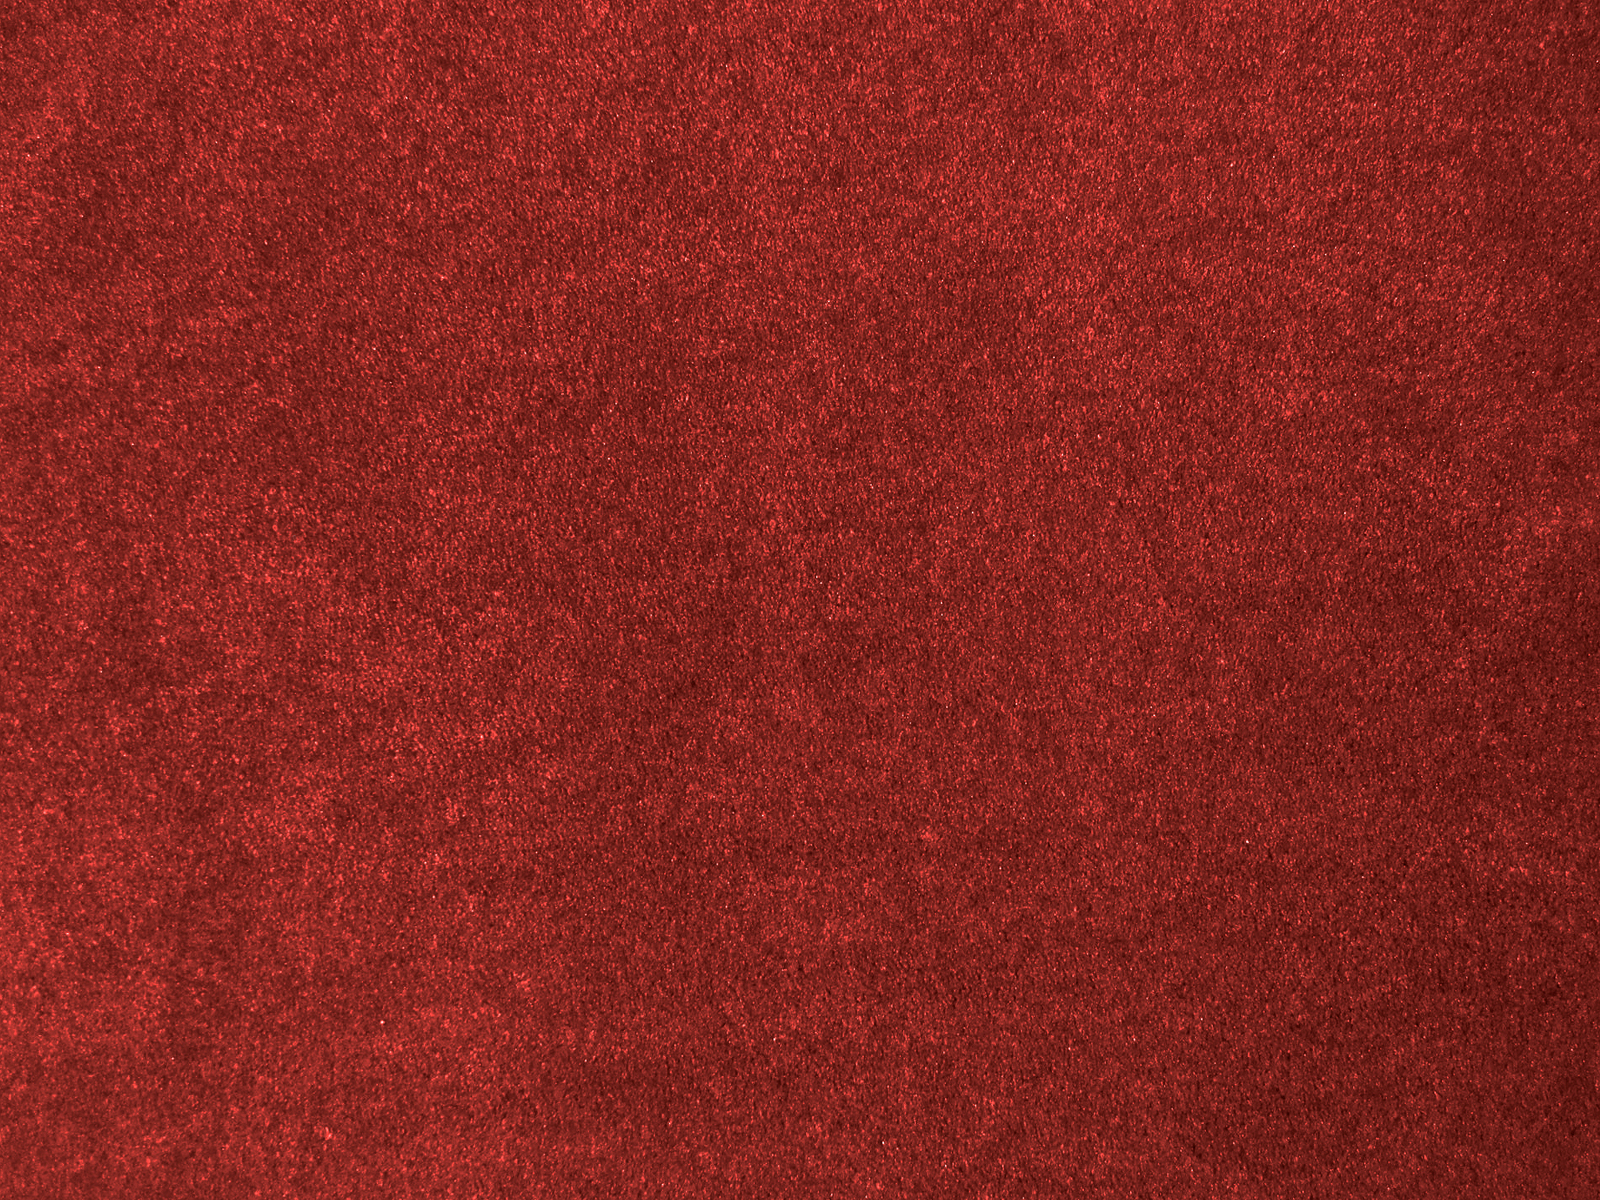 Red Fire | 10' Advantage Plus Carpeting for Trade Shows | 50 oz. 